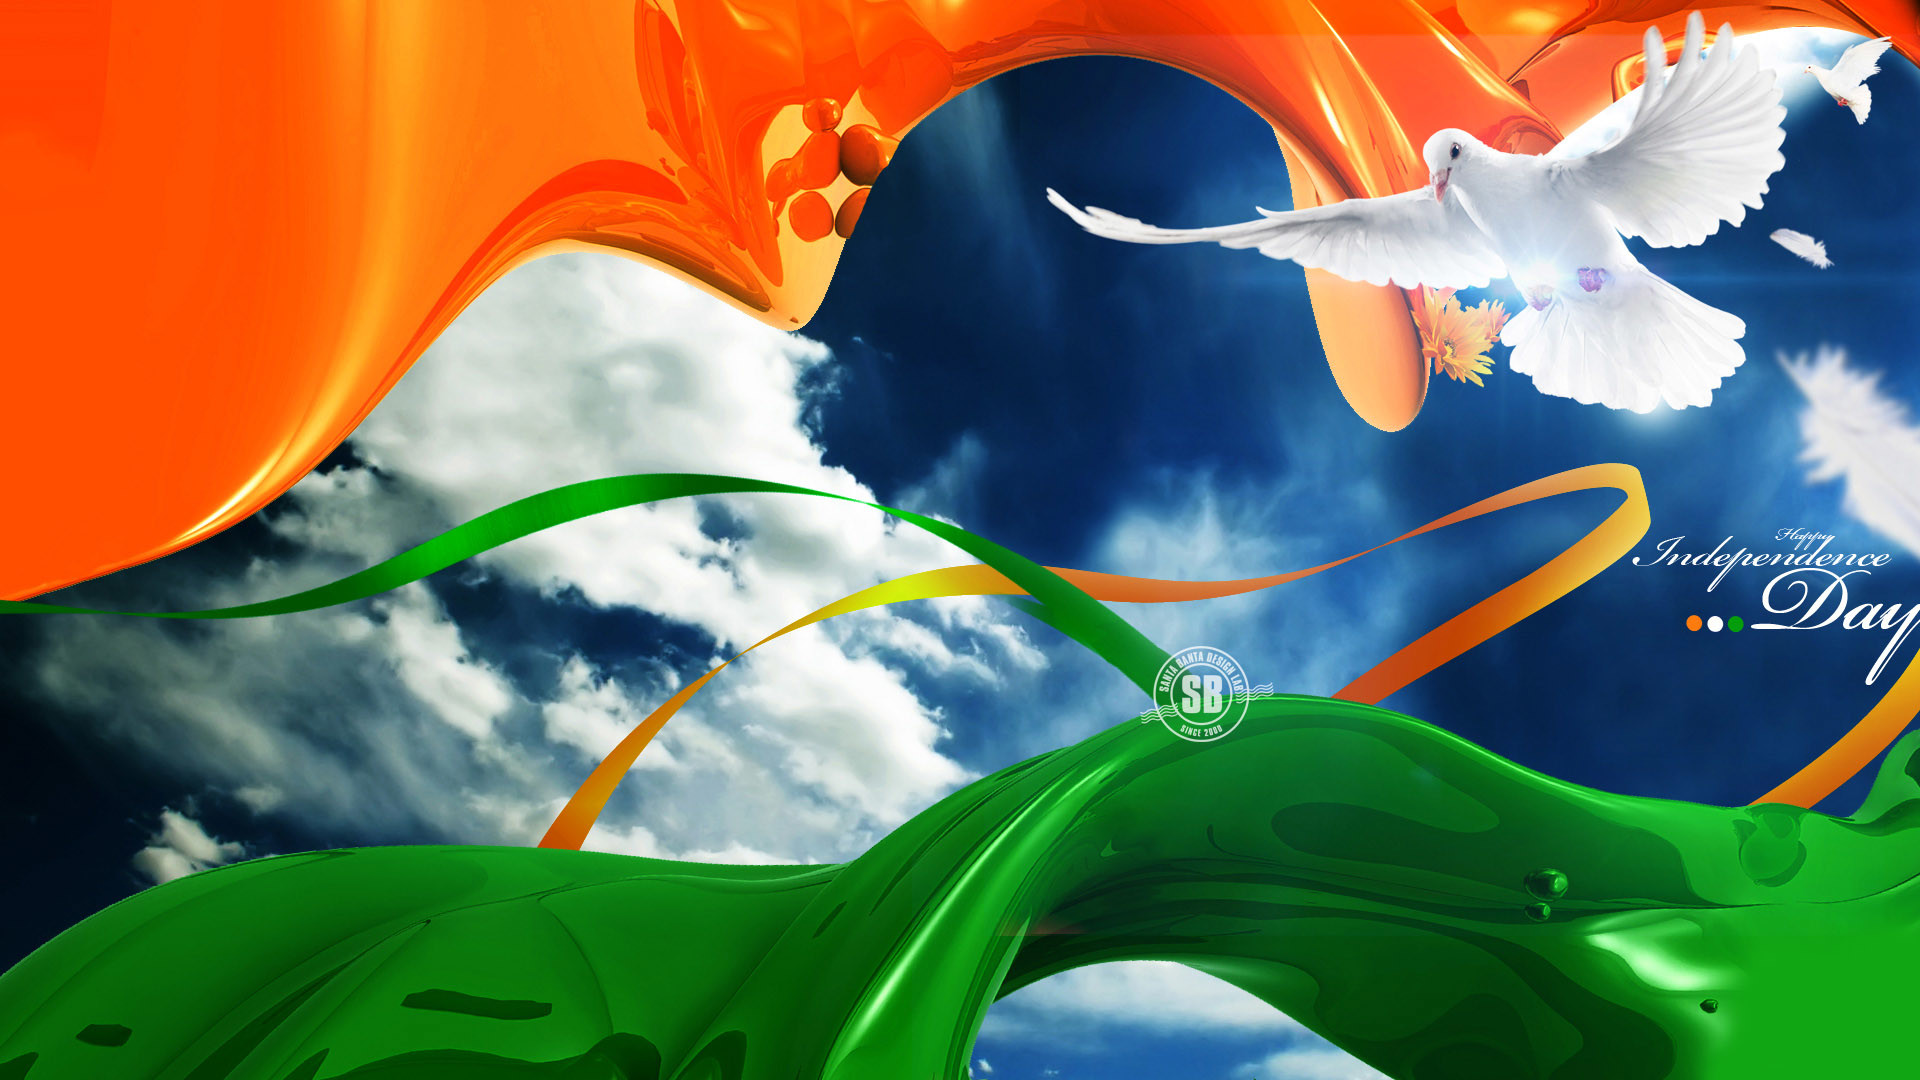 1920x1080 India independence day wallpaper india independence day wallpaper